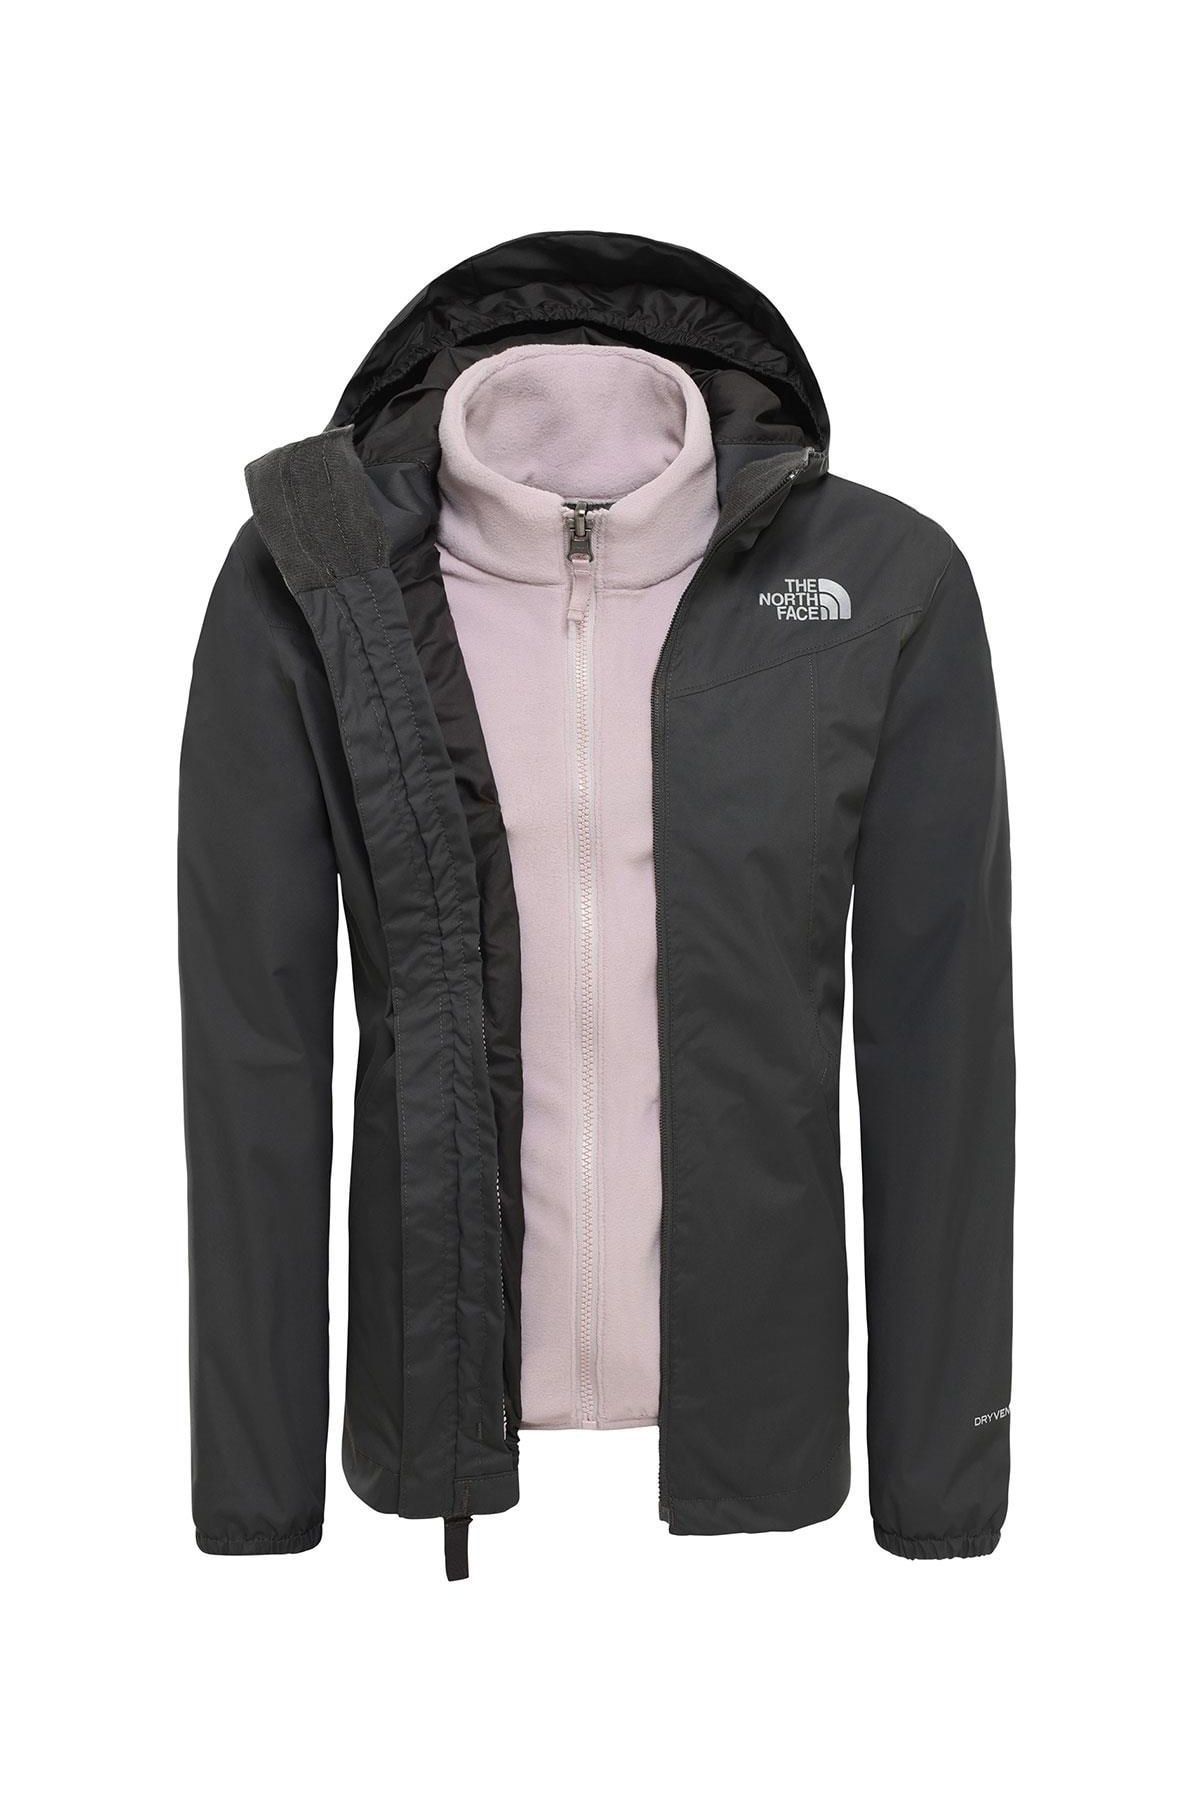 The North Face Eliana Triceket nf0A3Yf40C51